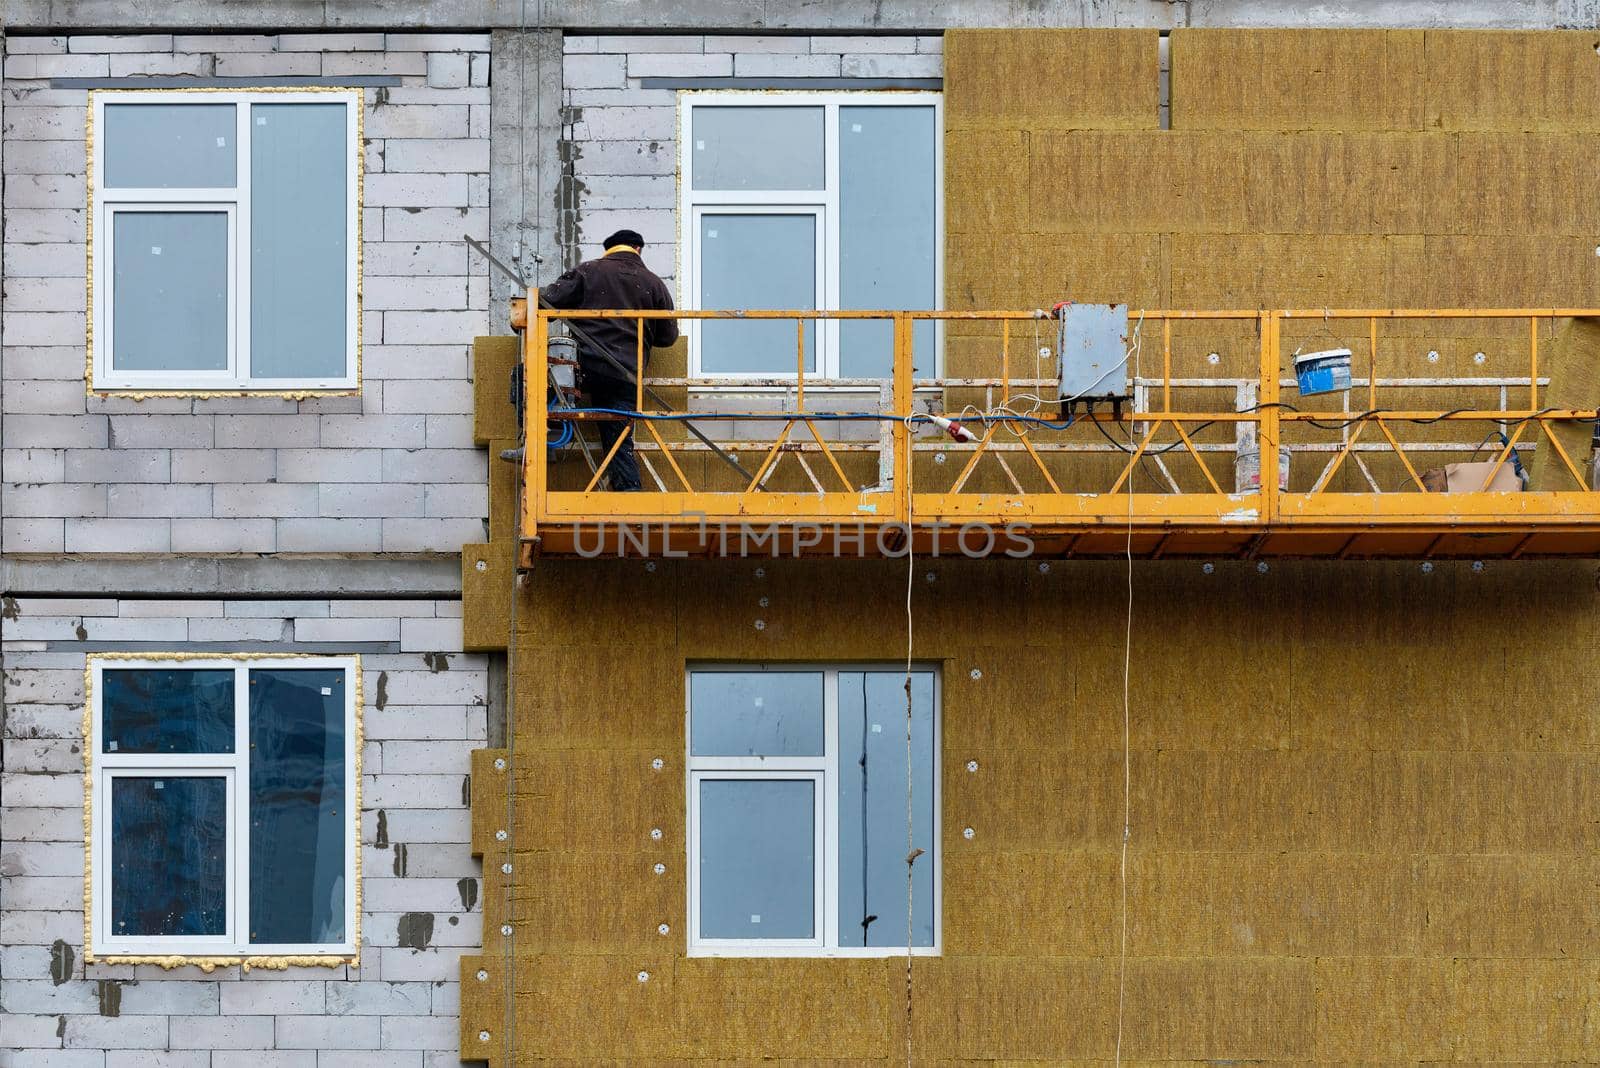 A builder, standing on a suspended platform, insulates the facade of a high-rise building under construction with mineral insulation. by Sergii